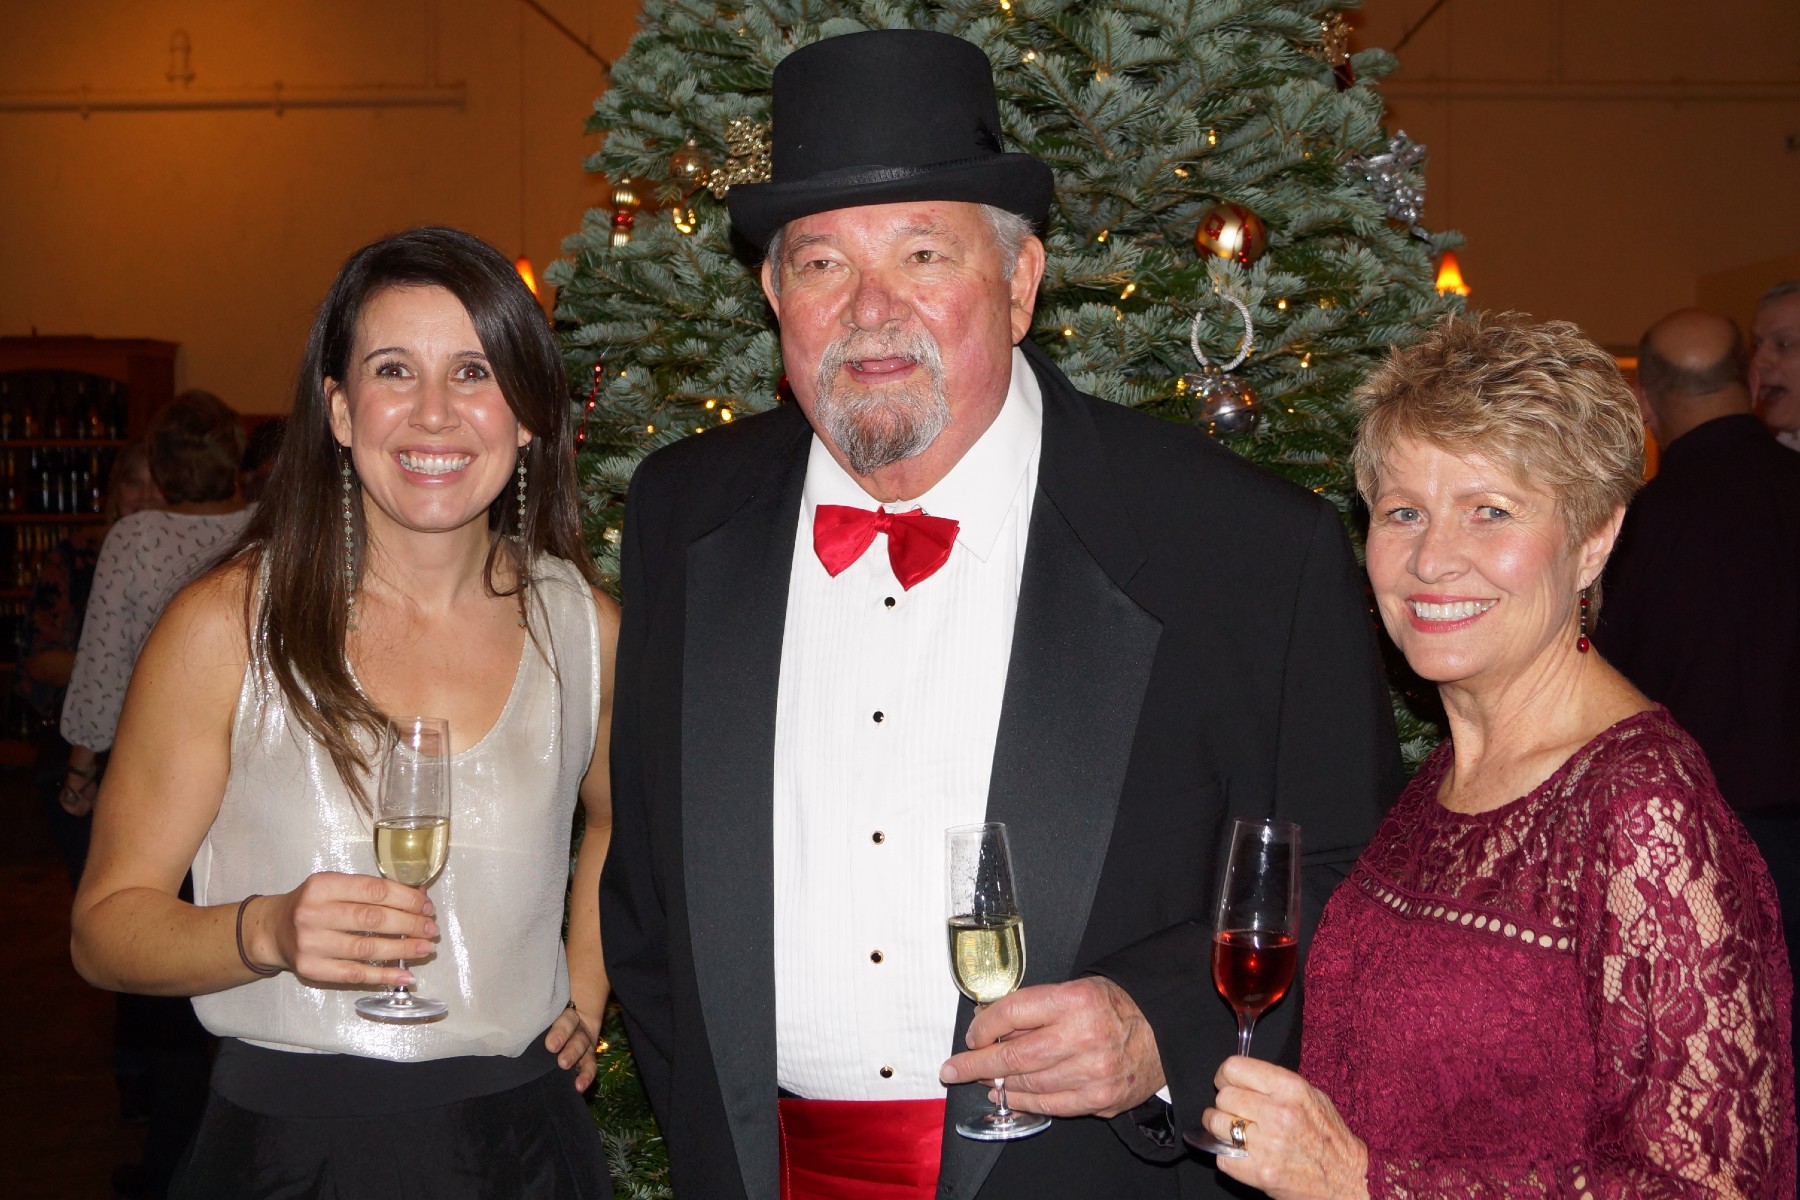 Winemaker Ashley Herzberg with Owners Mike and Vicky Farrow, Amista Vineyards, Sparkling Holiday Party, Healdsburg